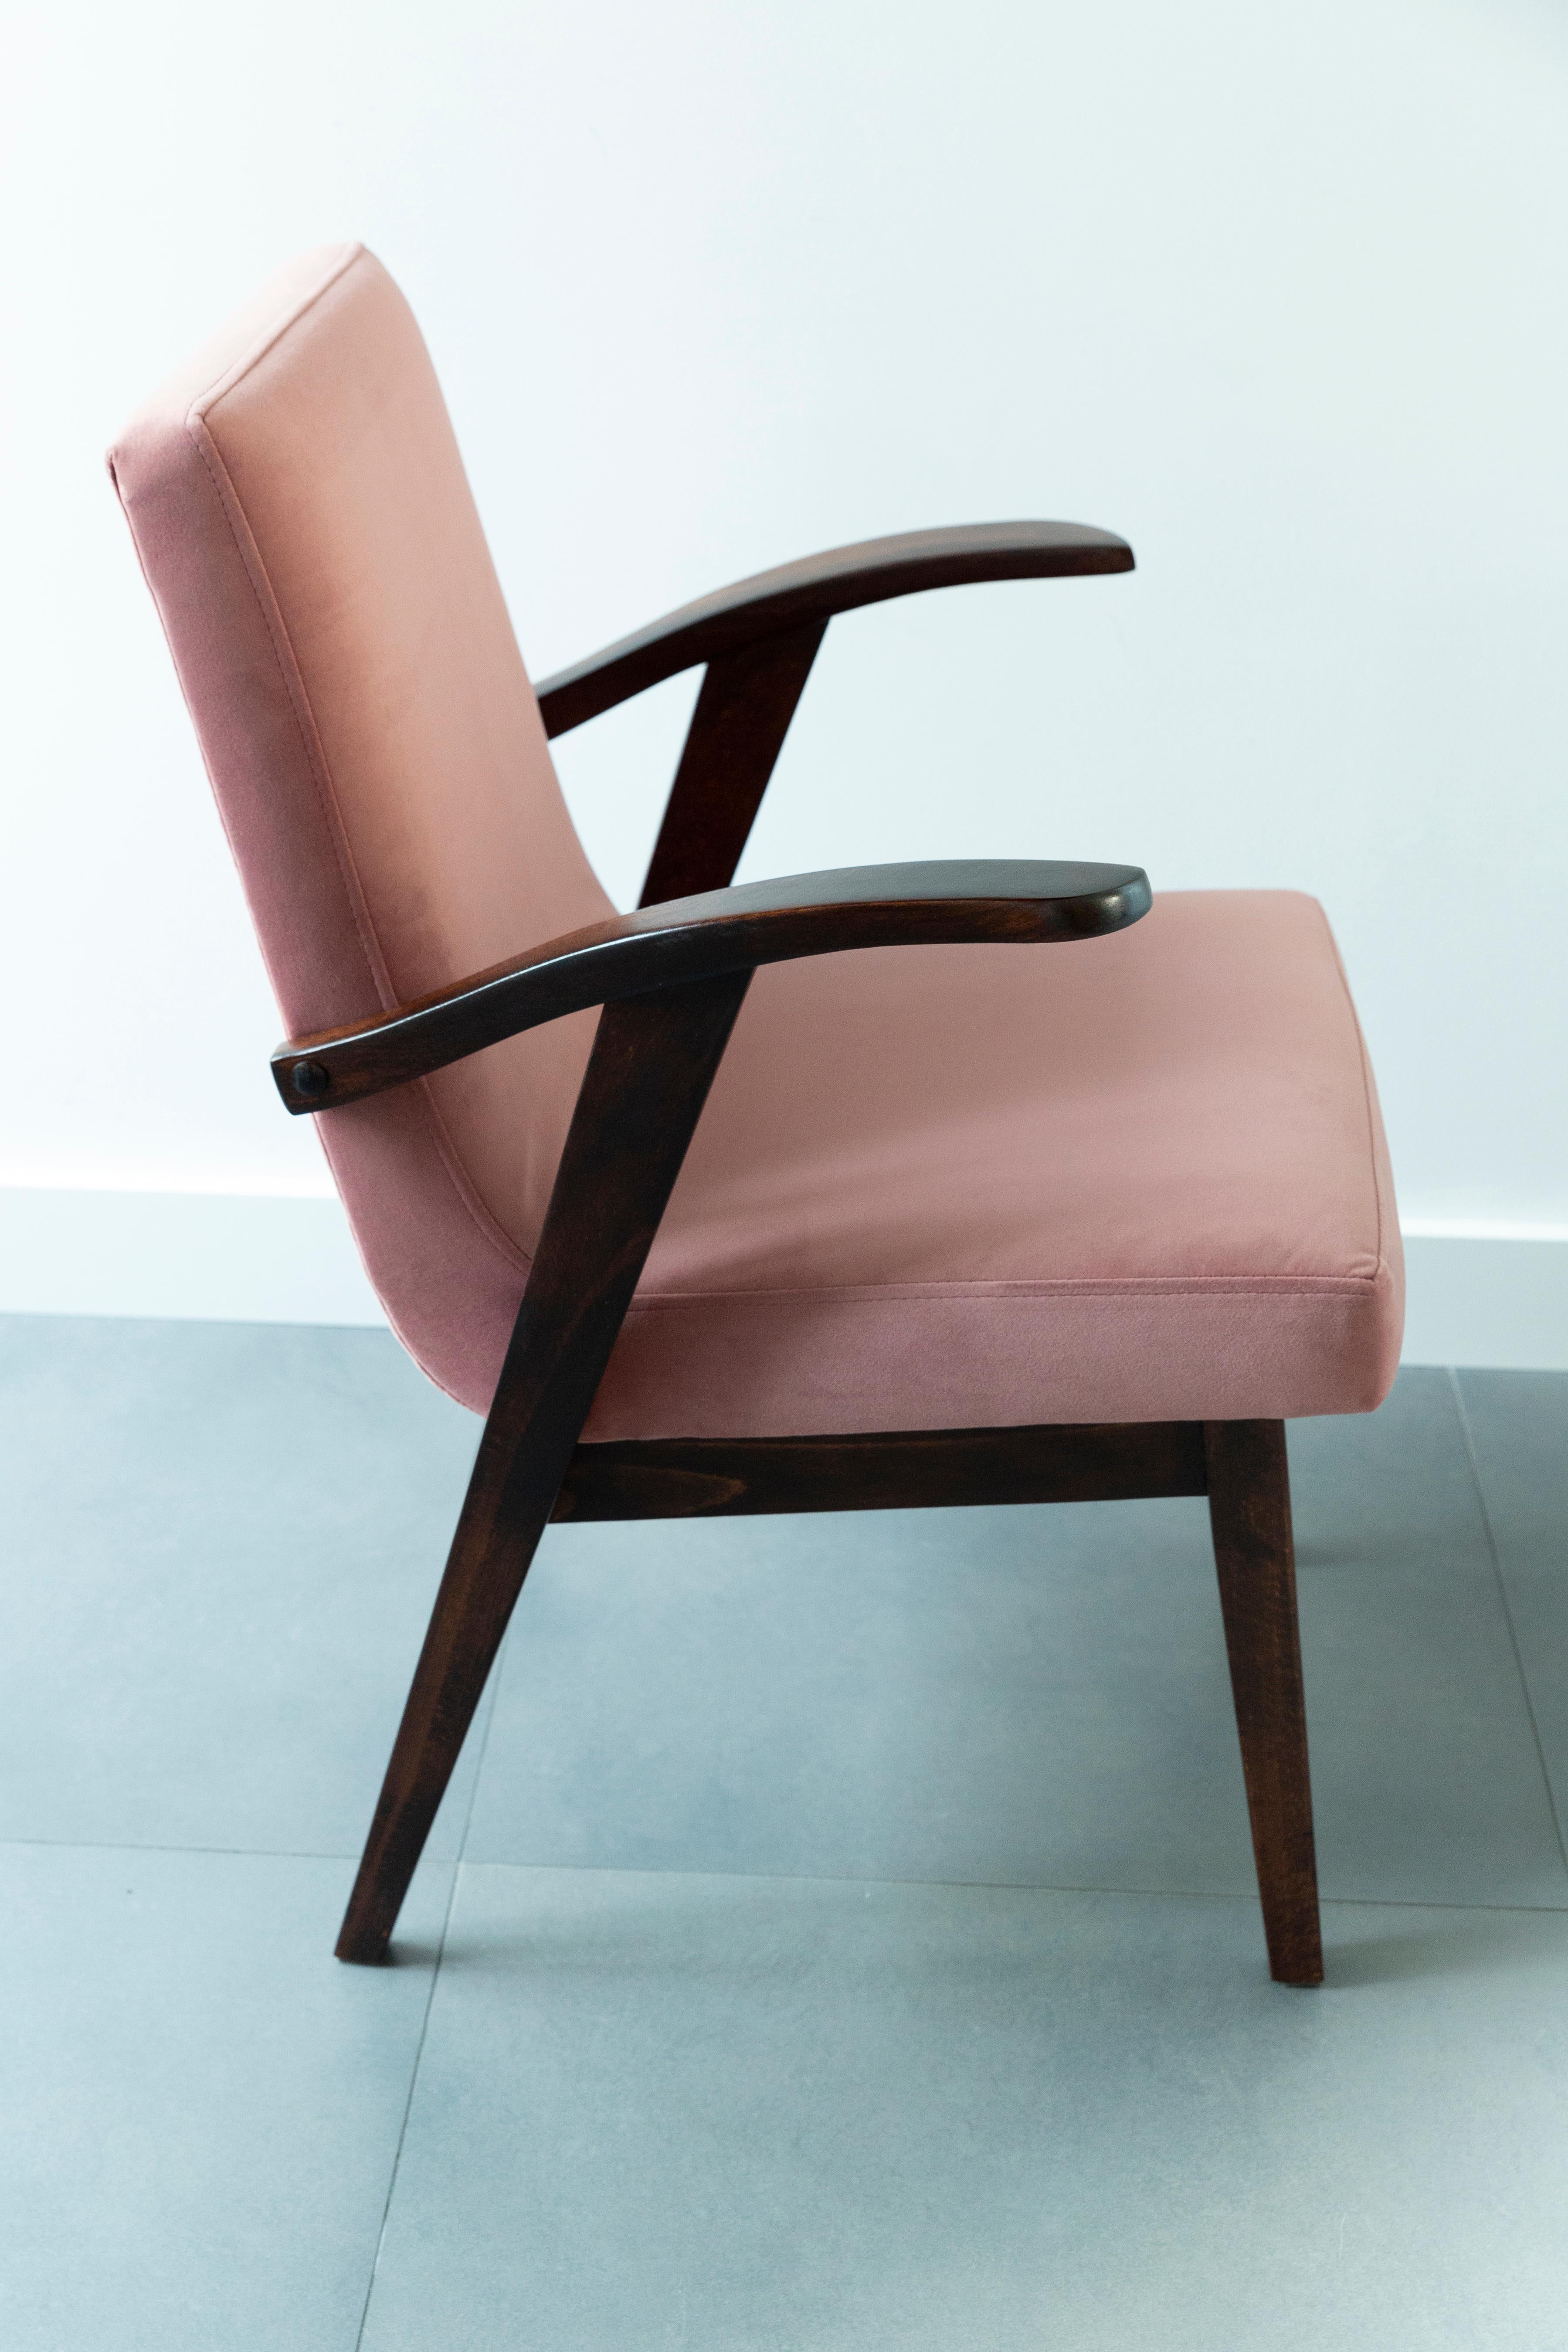 20th Century Vintage Armchair in Dusty Pink Velvet by Mieczyslaw Puchala, 1960s For Sale 4